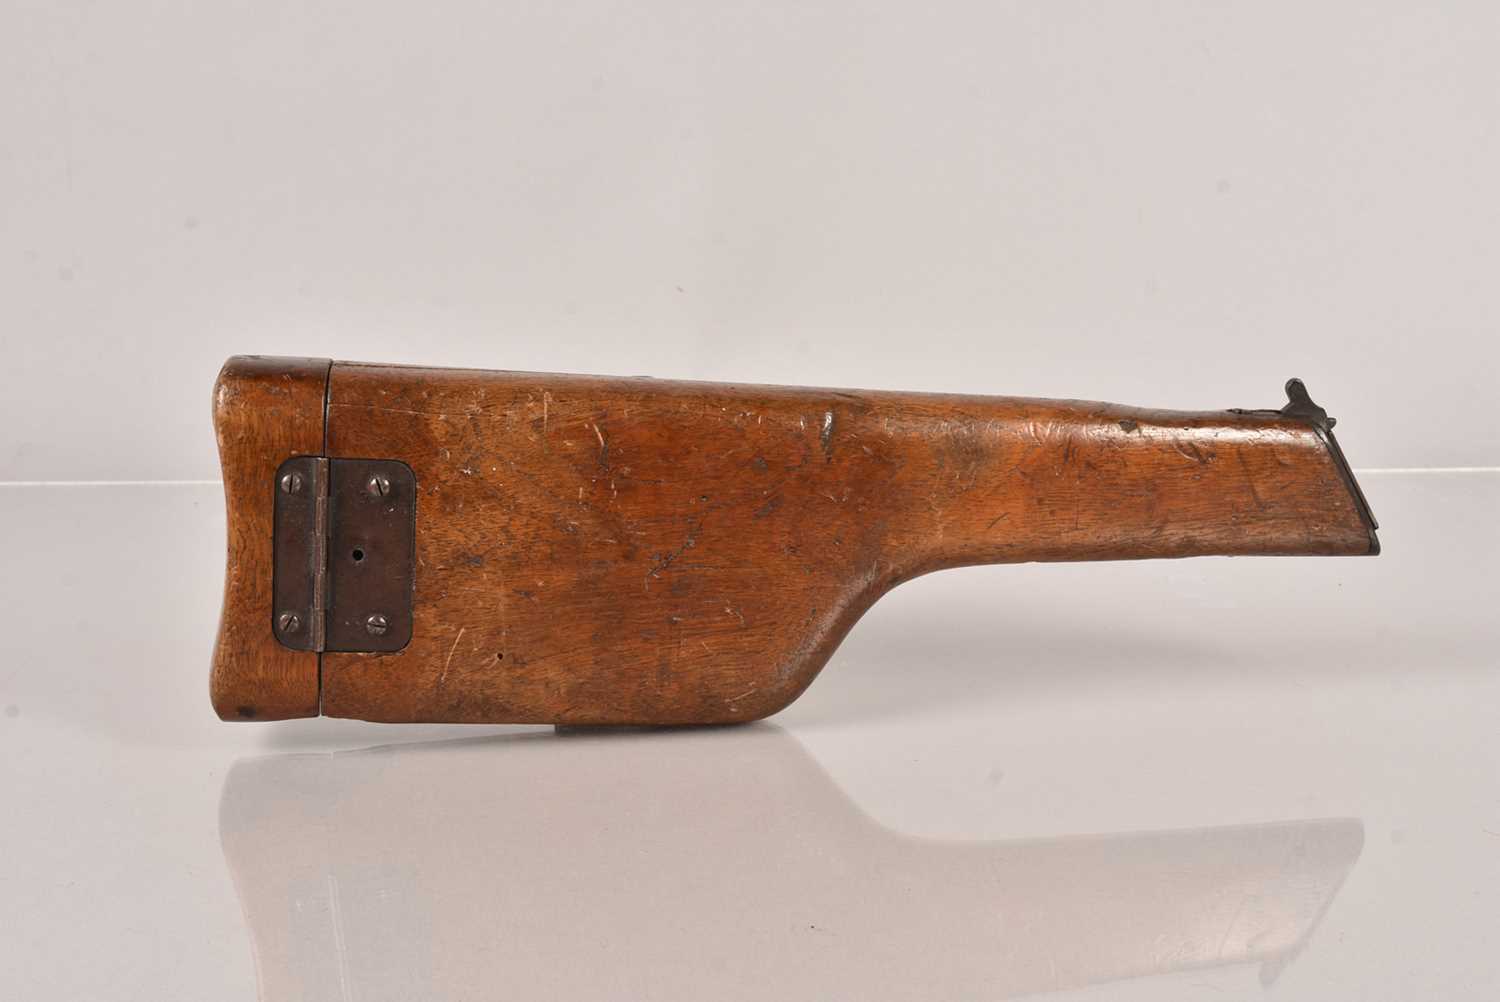 A Broom Handle C96 Mauser Stock, - Image 2 of 7